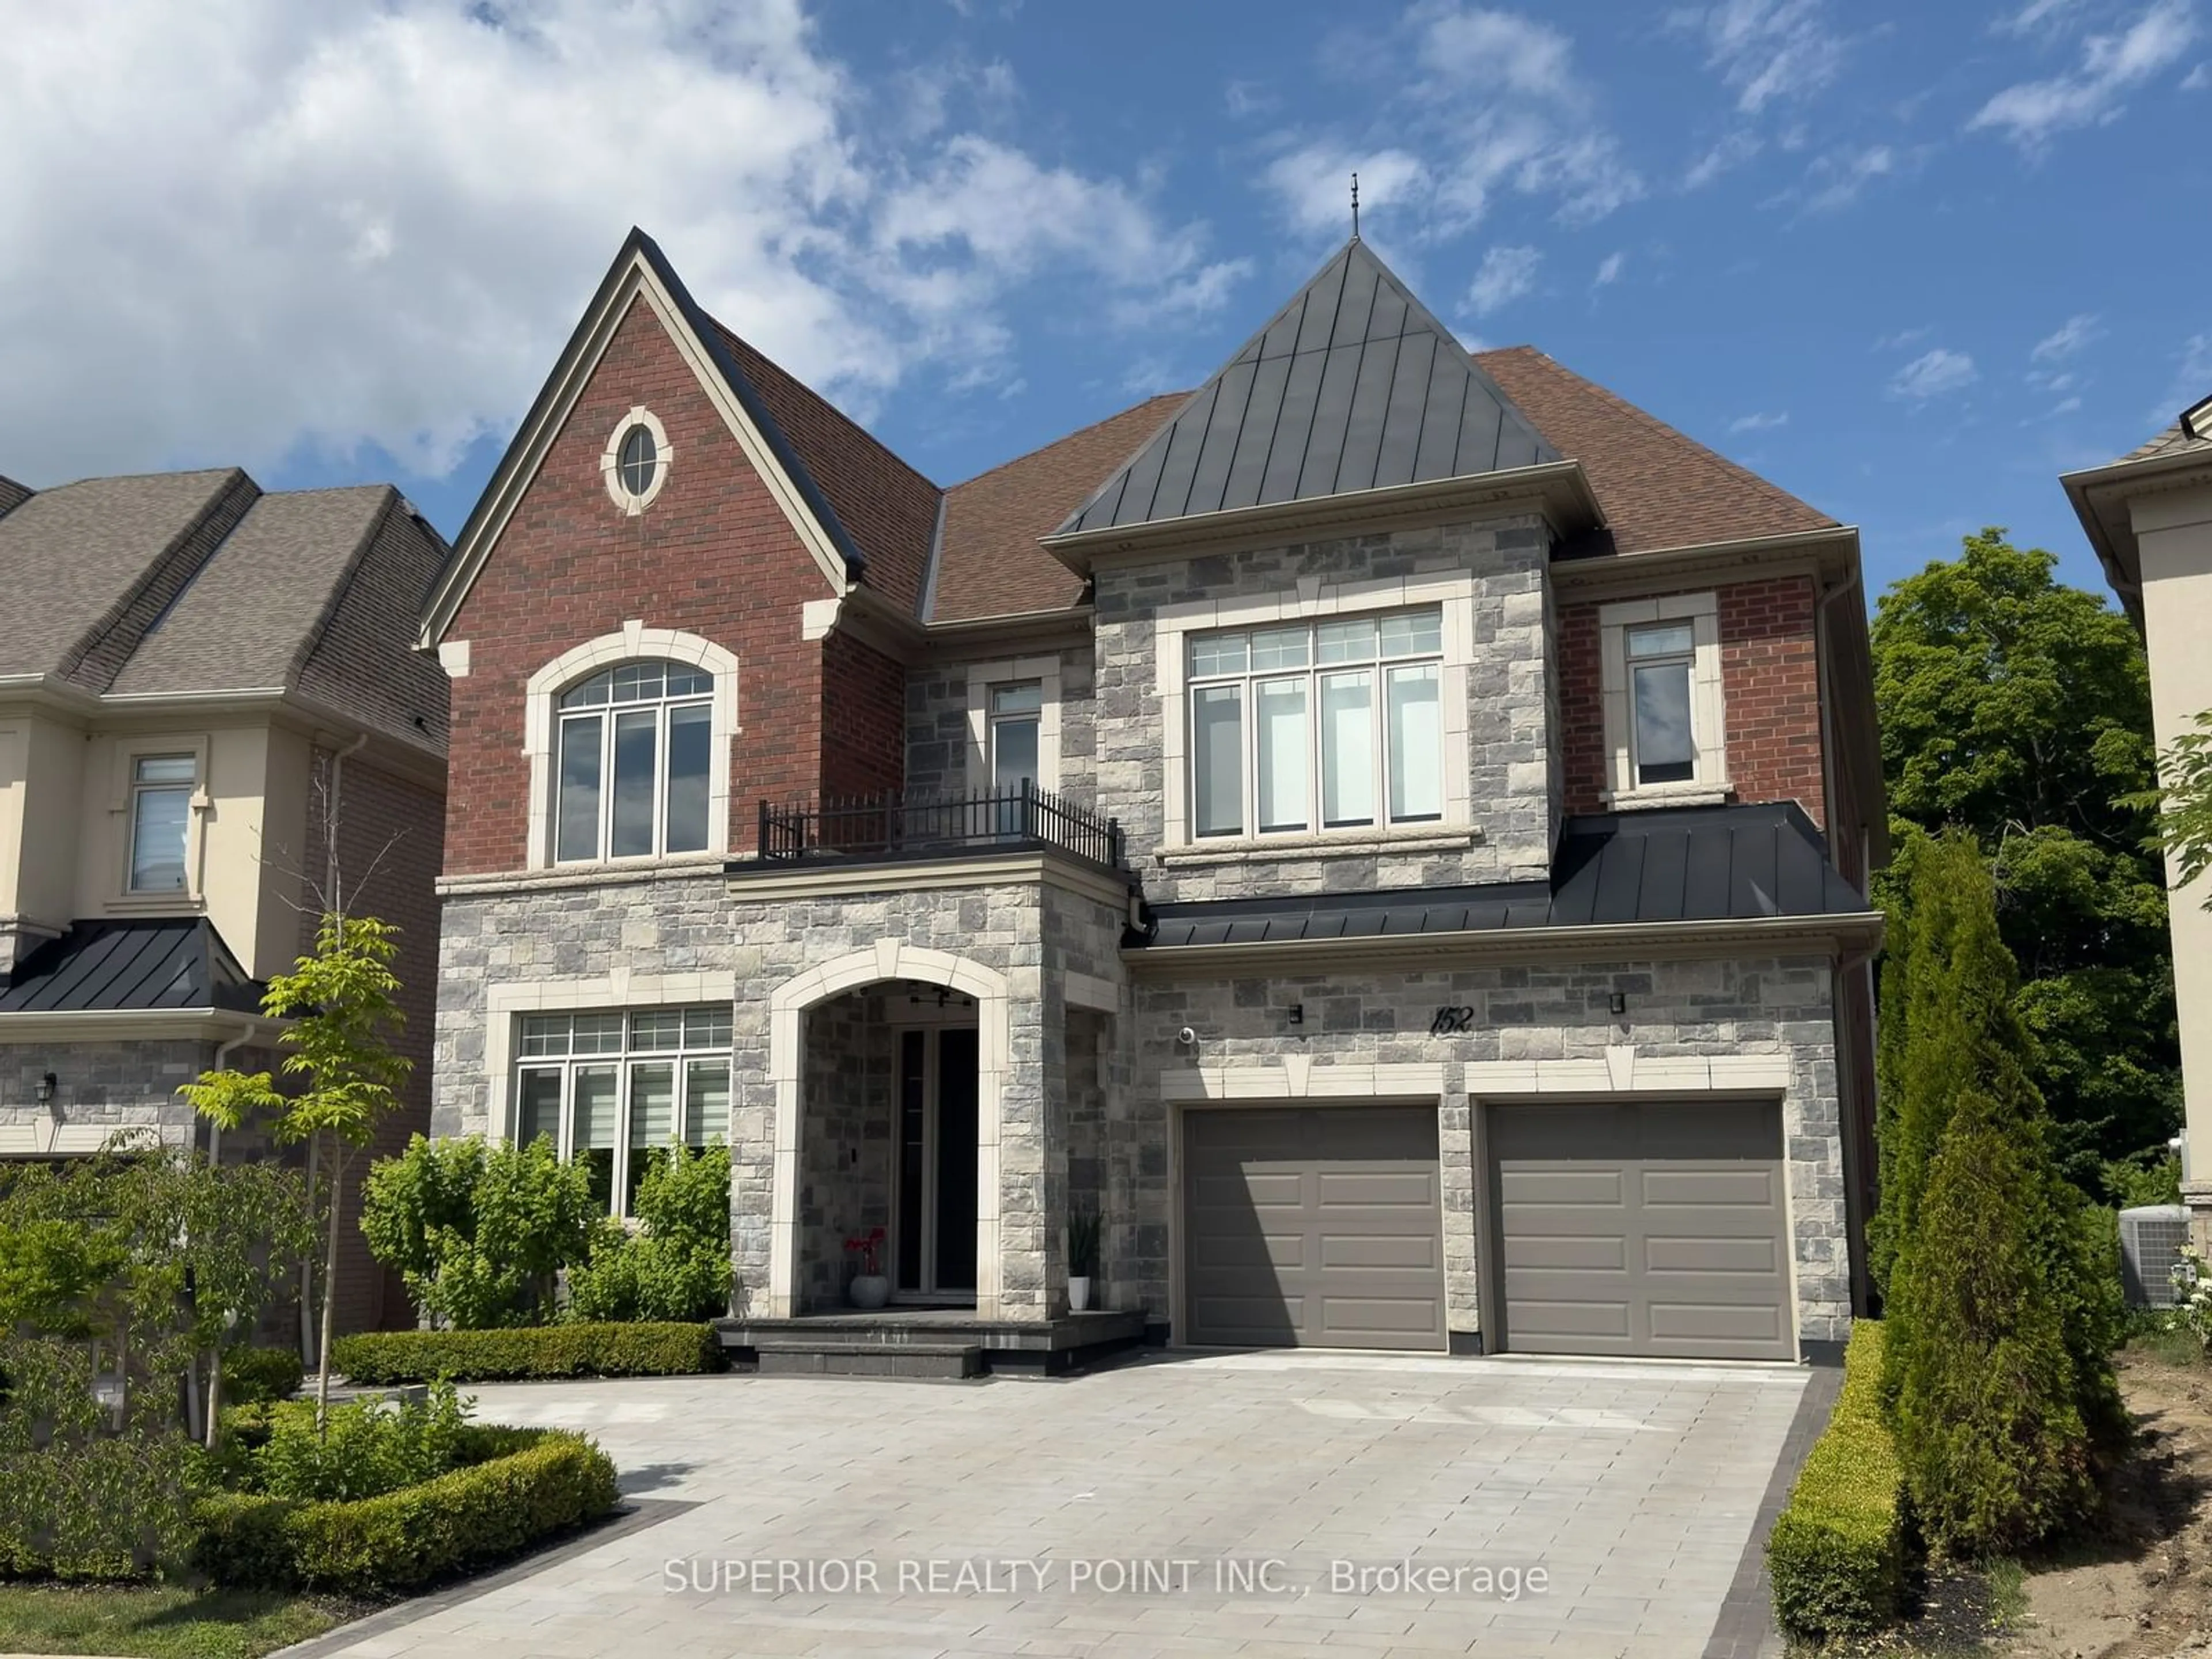 Home with brick exterior material for 152 Farrell Rd, Vaughan Ontario L6A 4W6